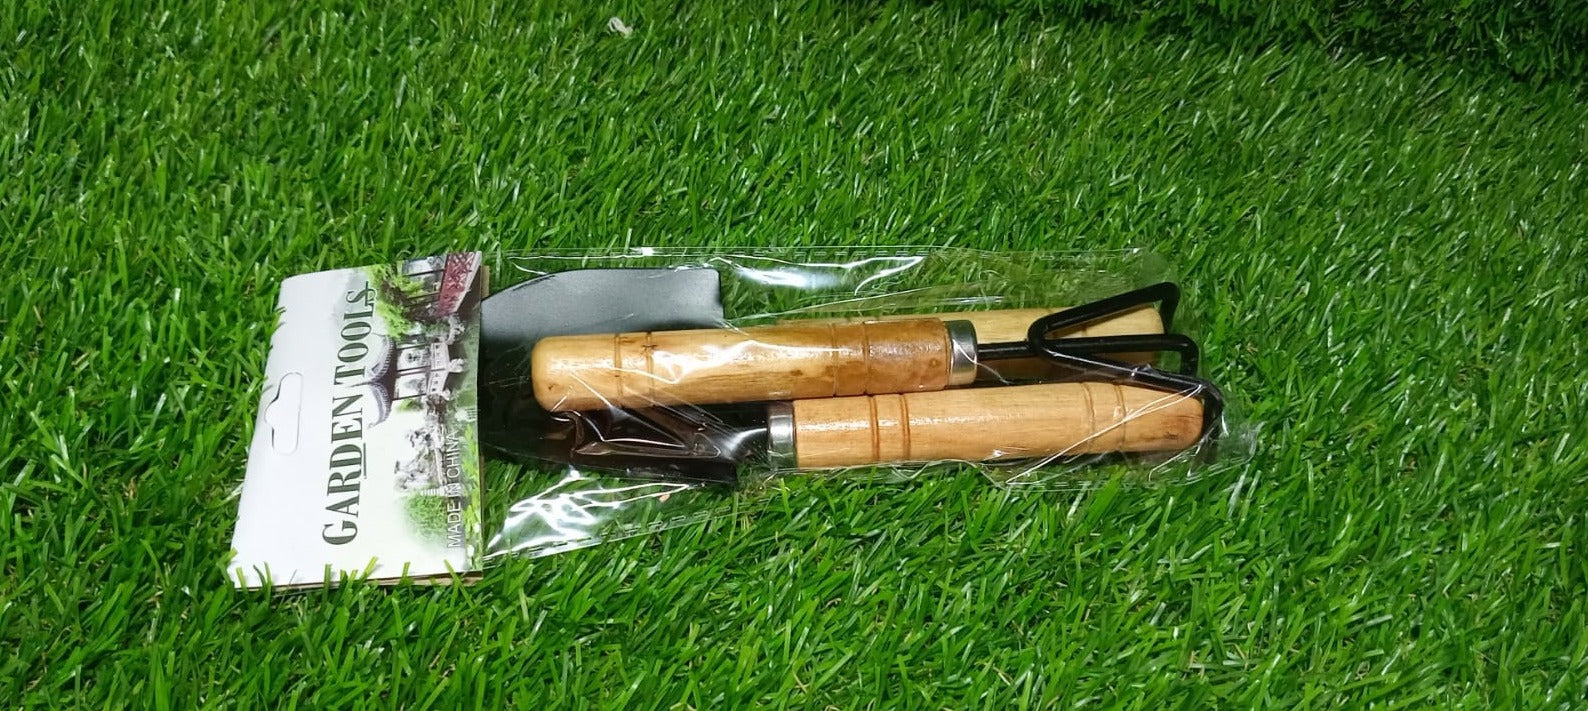 Small sized Hand Cultivator, Small Trowel, Garden Fork (Set of 3)